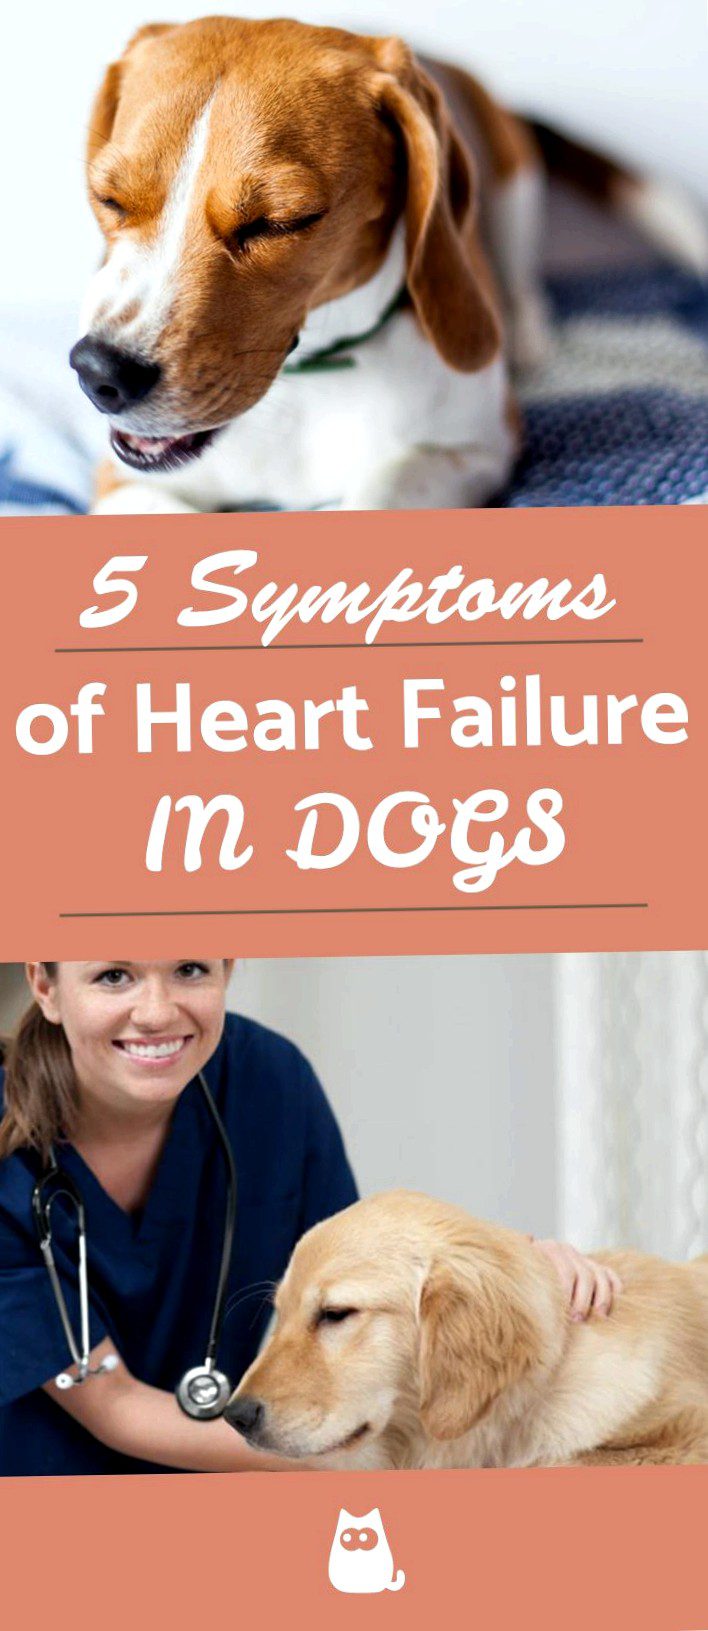 Signs and Treatment of Congestive Heart Failure in Dogs